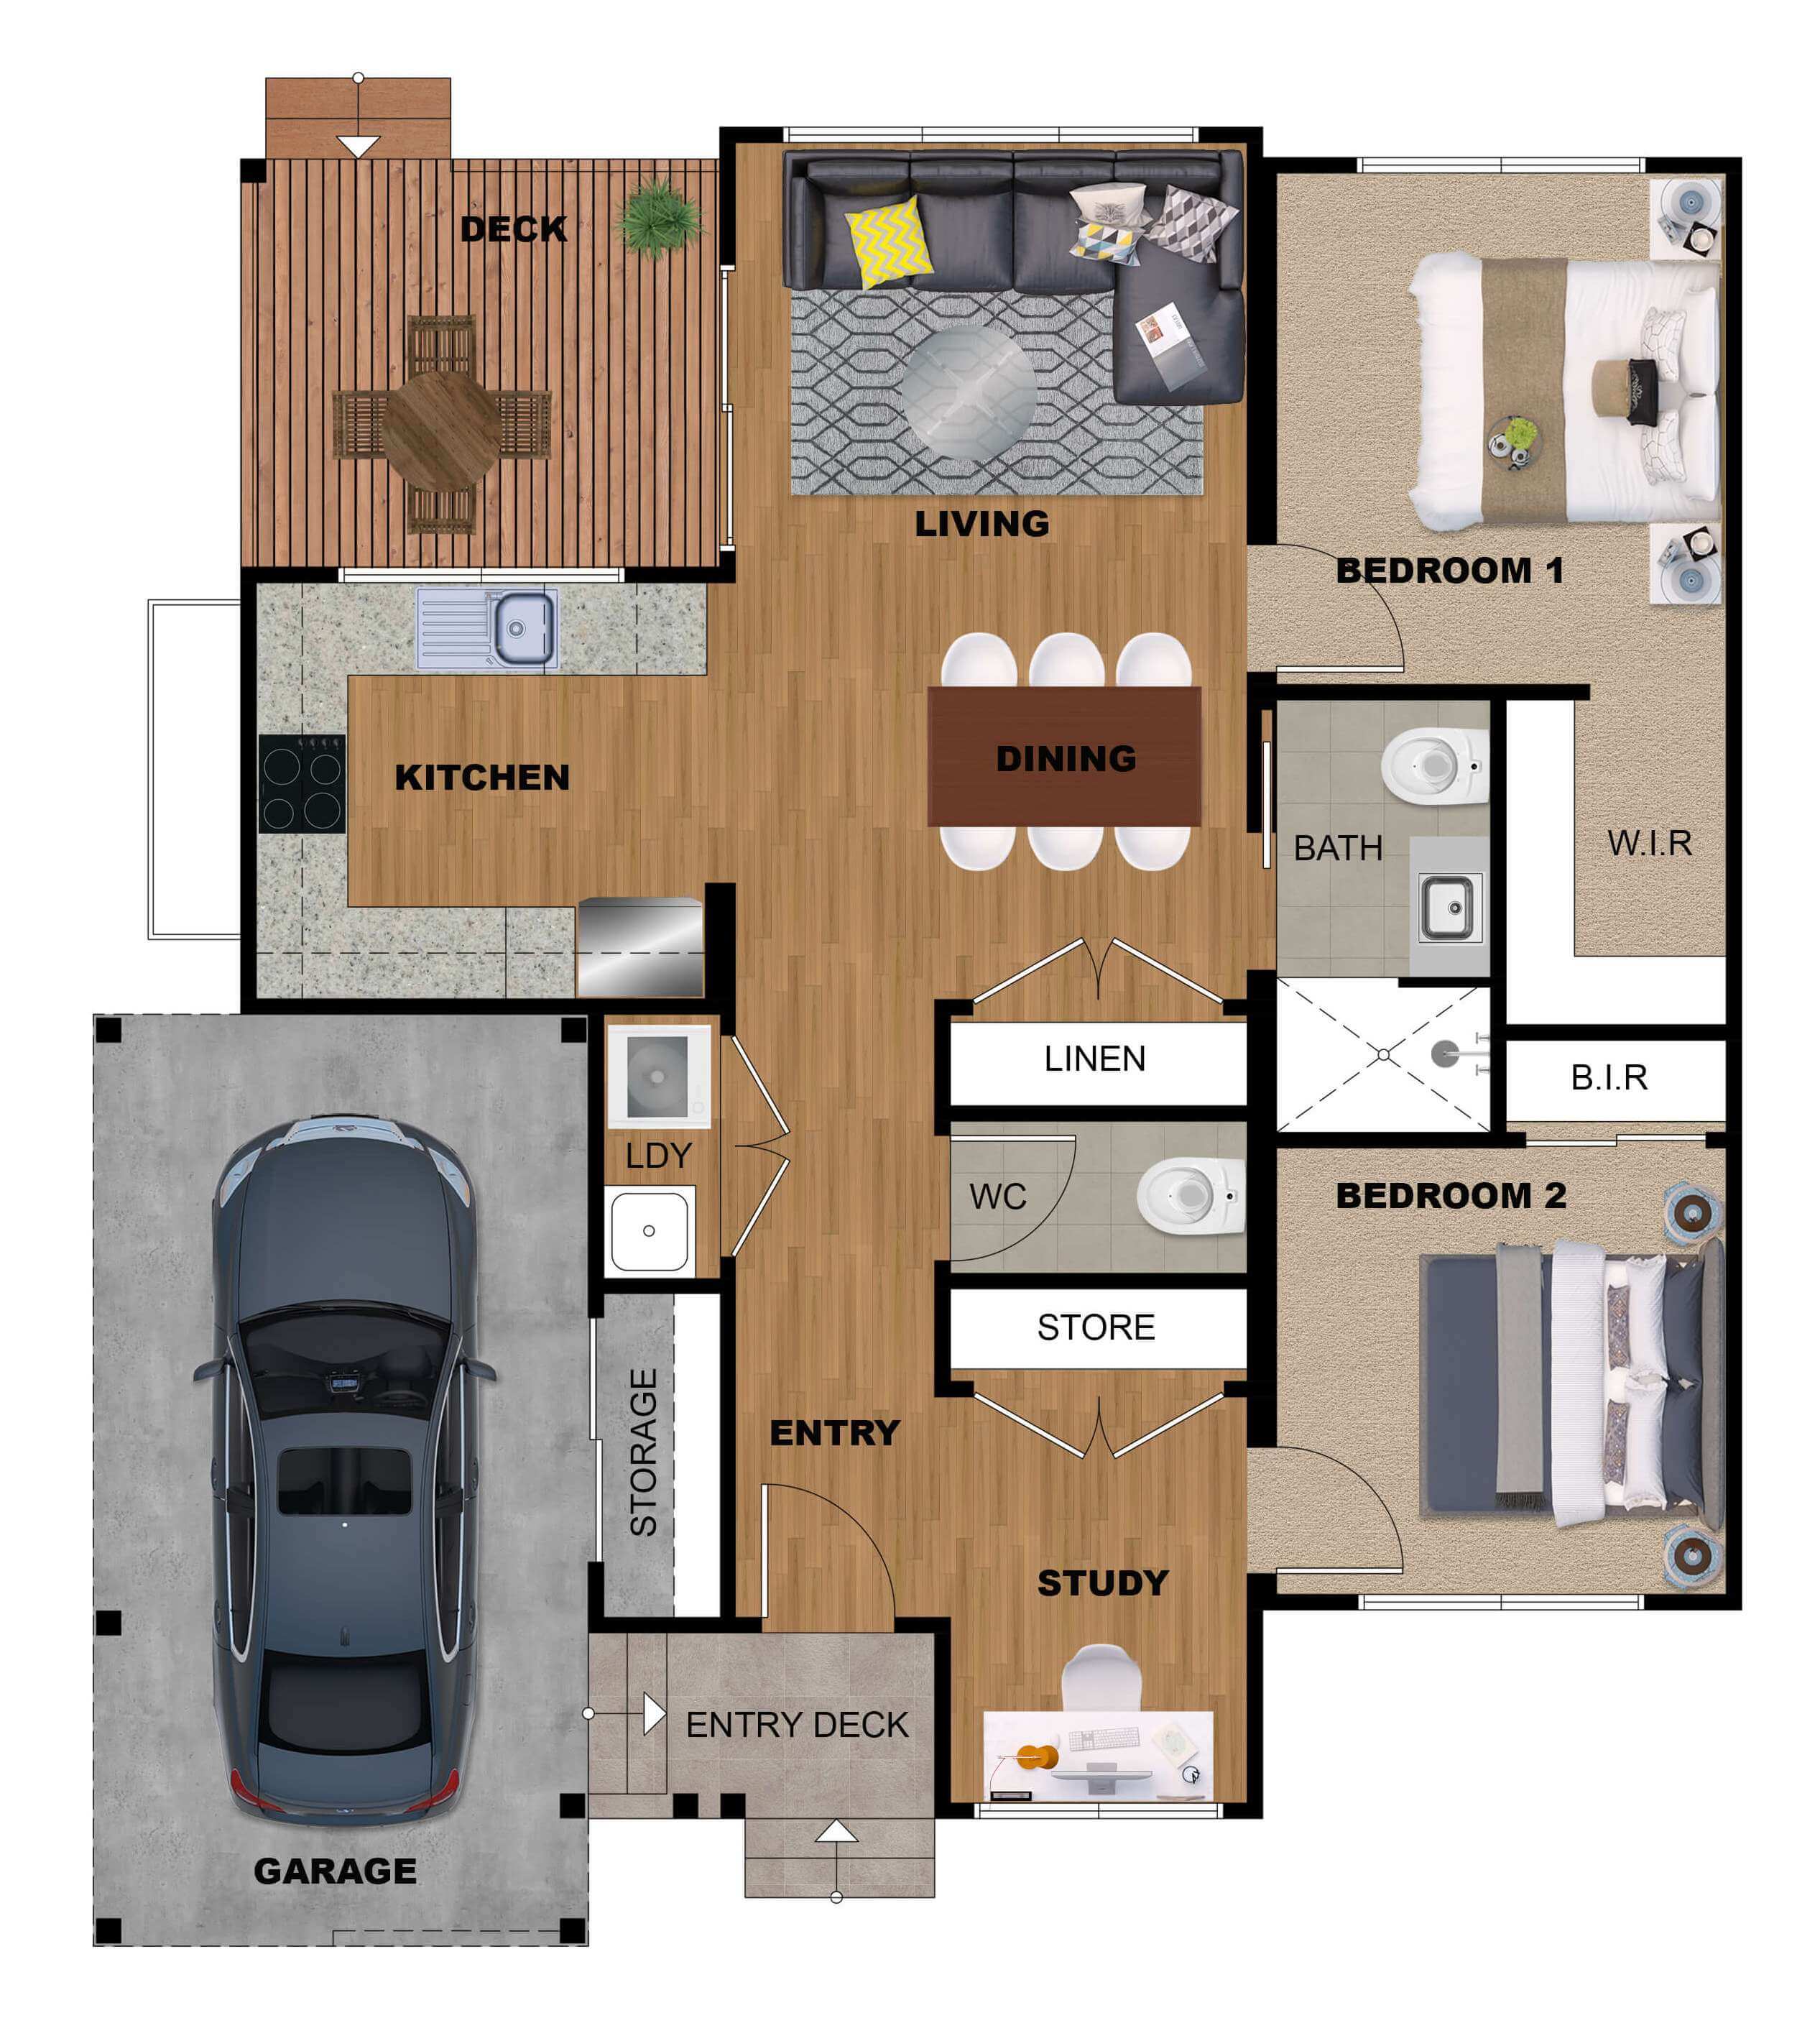 2D 3D Floor Plan Rendering Services at Best Price The